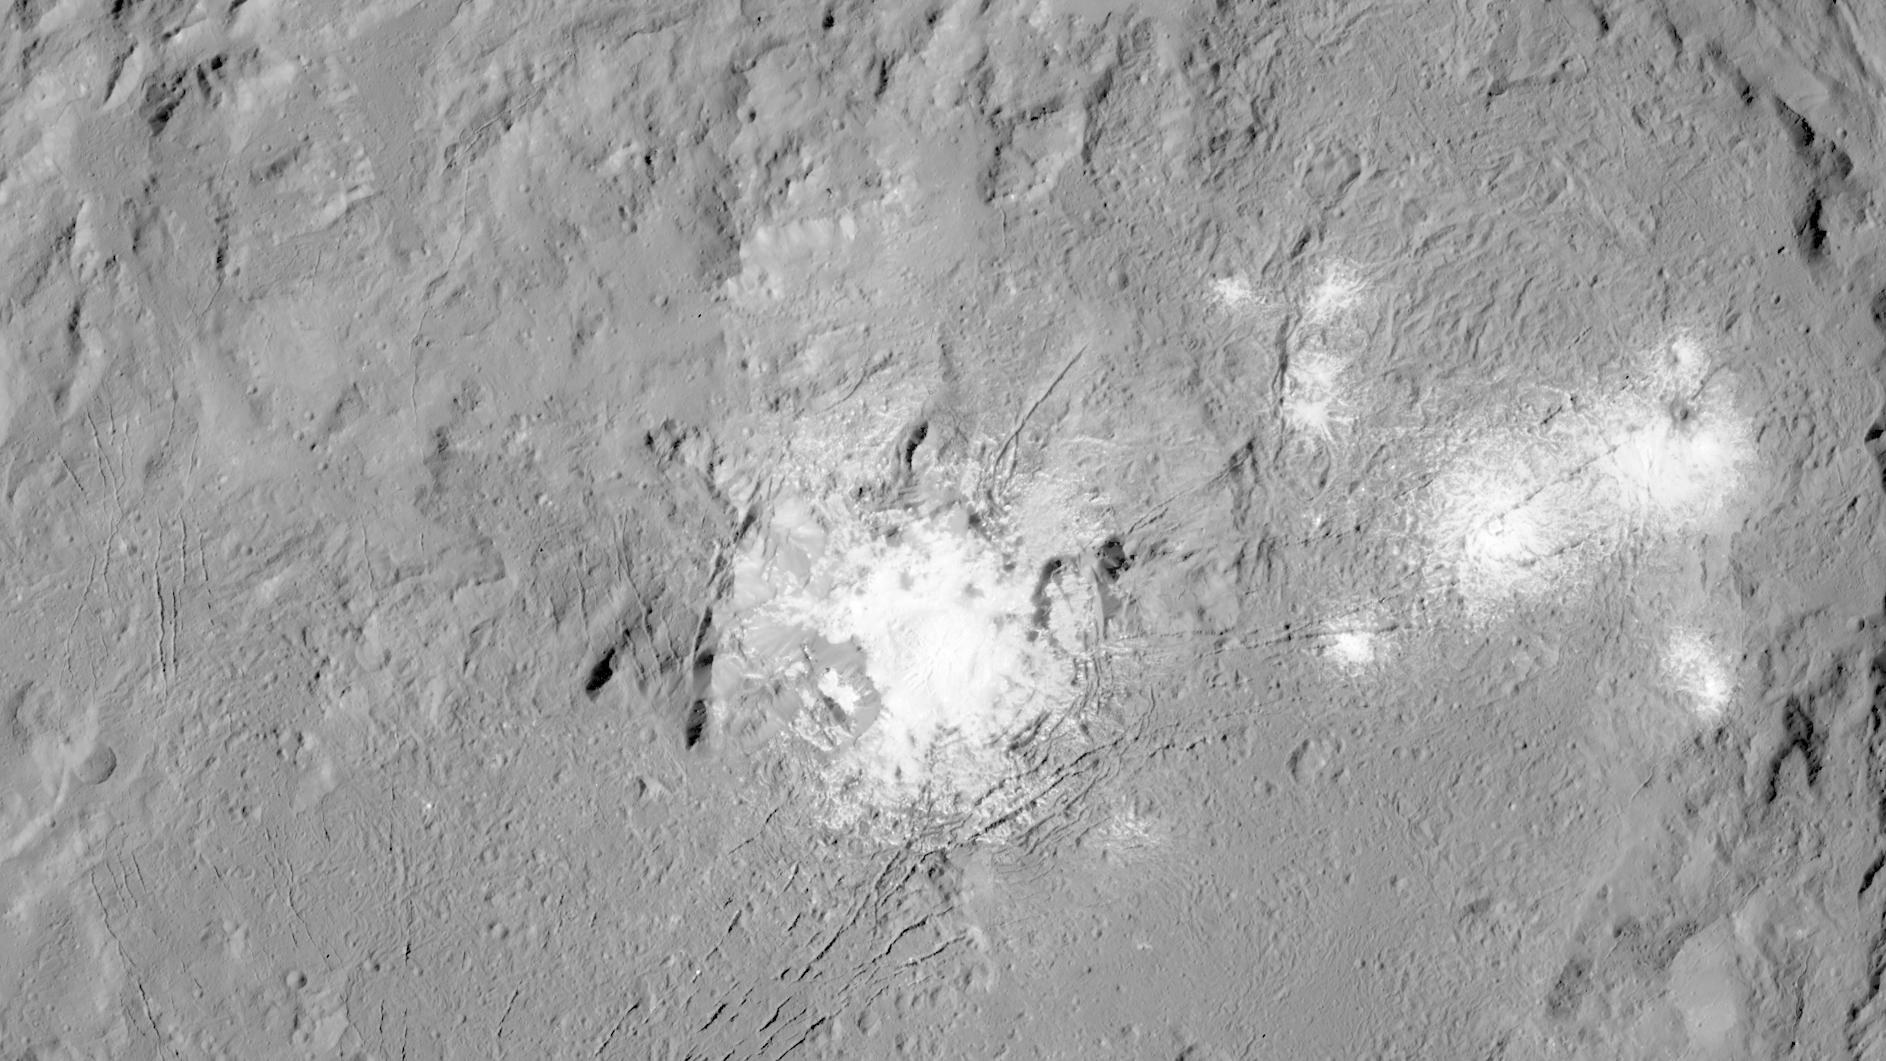 Cracks and bright spots in the Occator crater